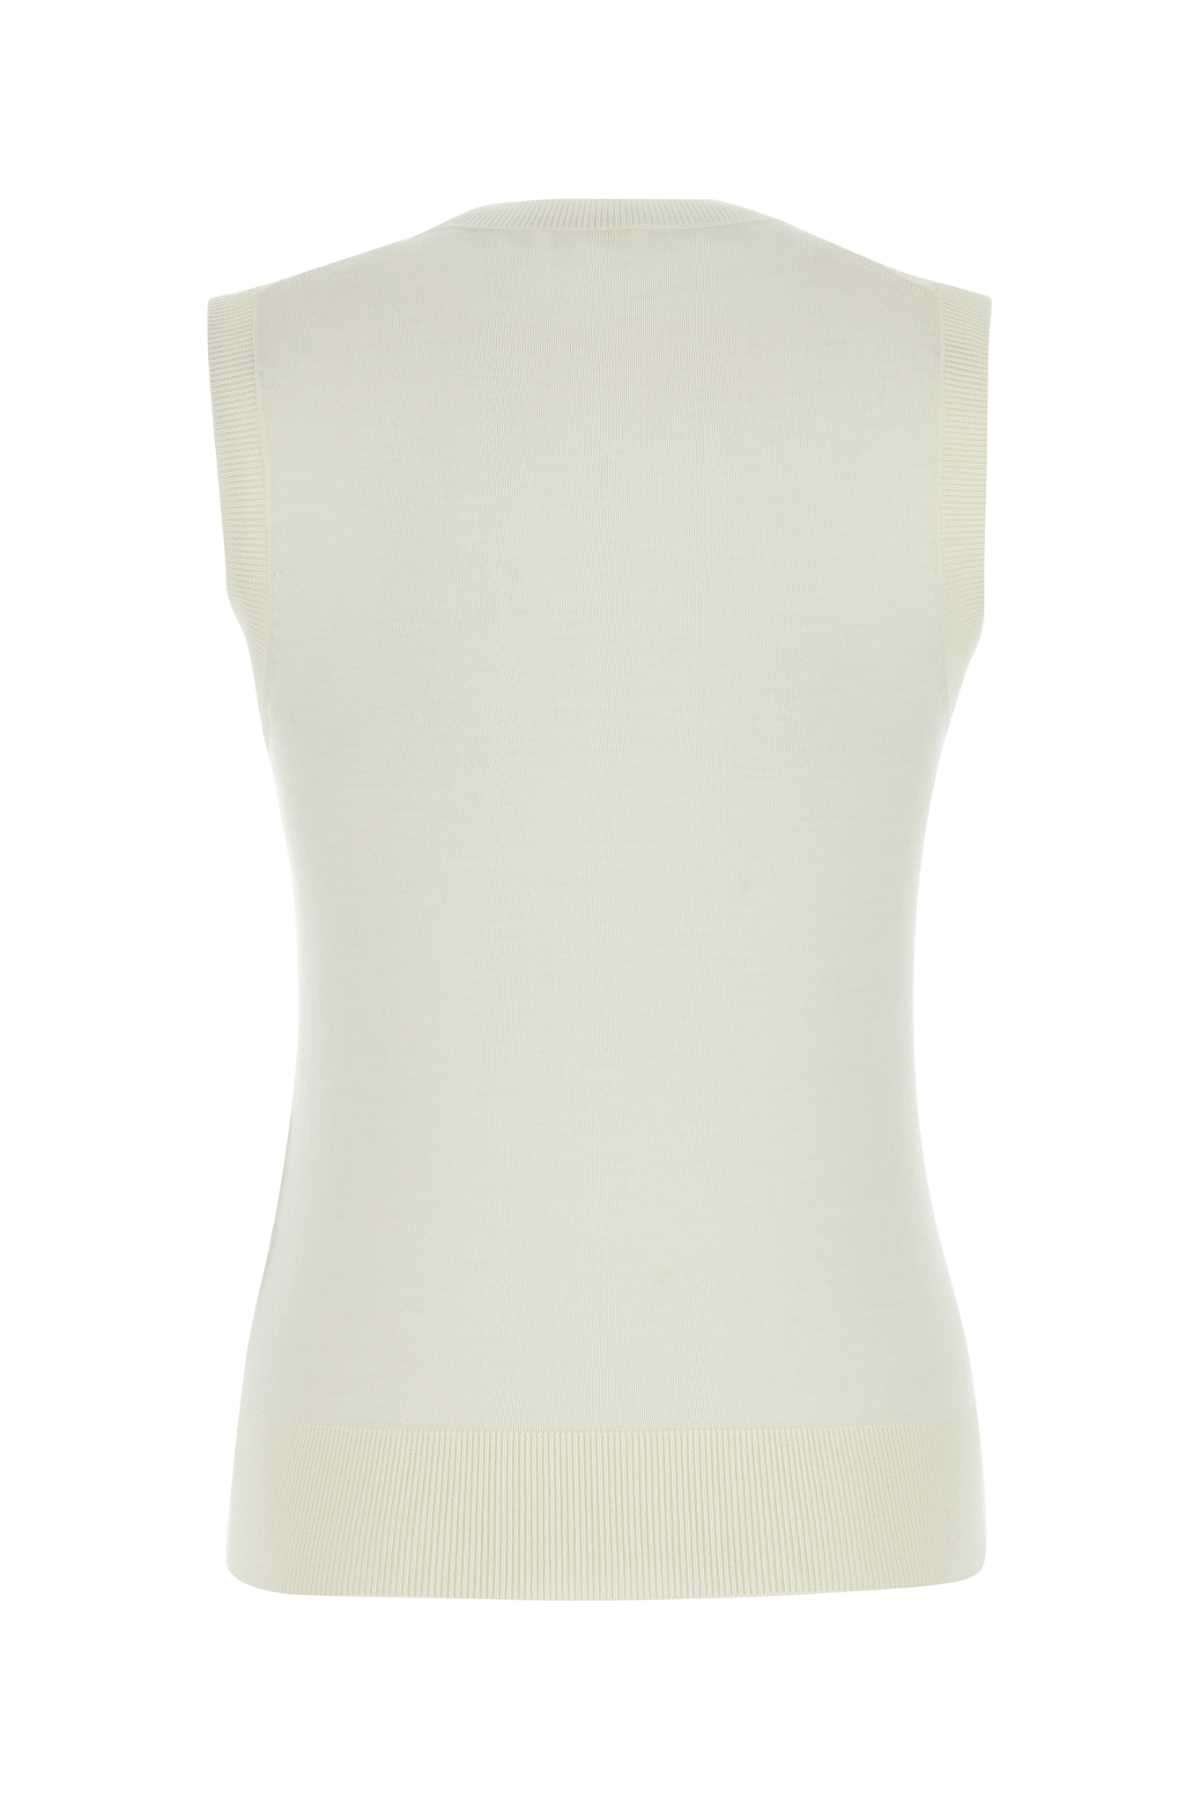 Chloé Ivory Wool Top In Iconicmilk